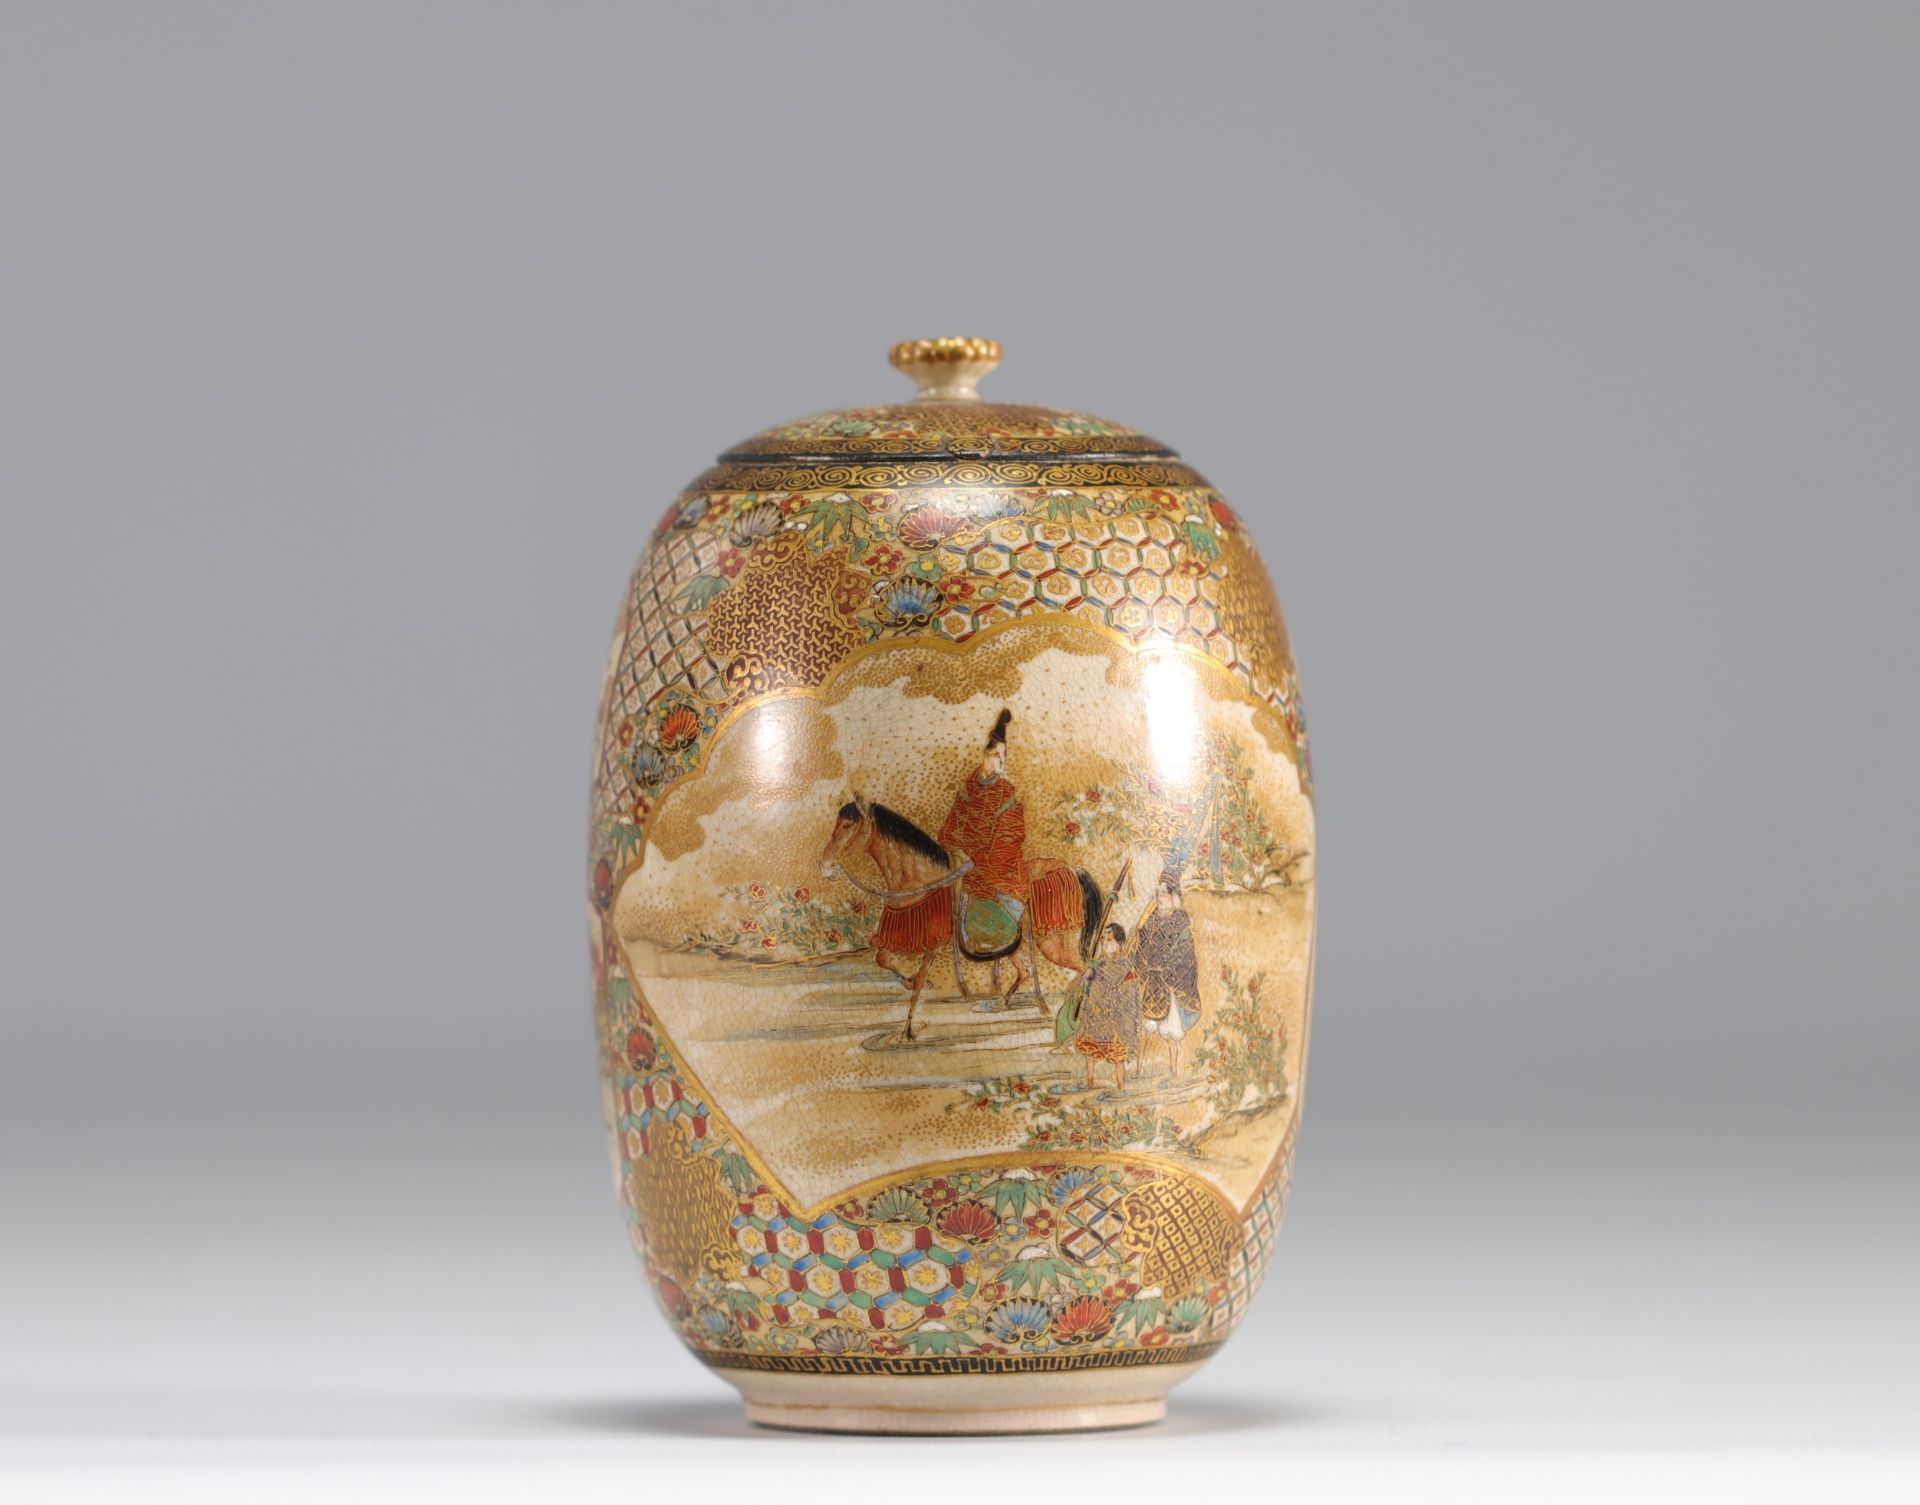 A beautiful enamel-decorated Satsuma covered vase with figures and flowers, circa late 19th century - Image 2 of 6